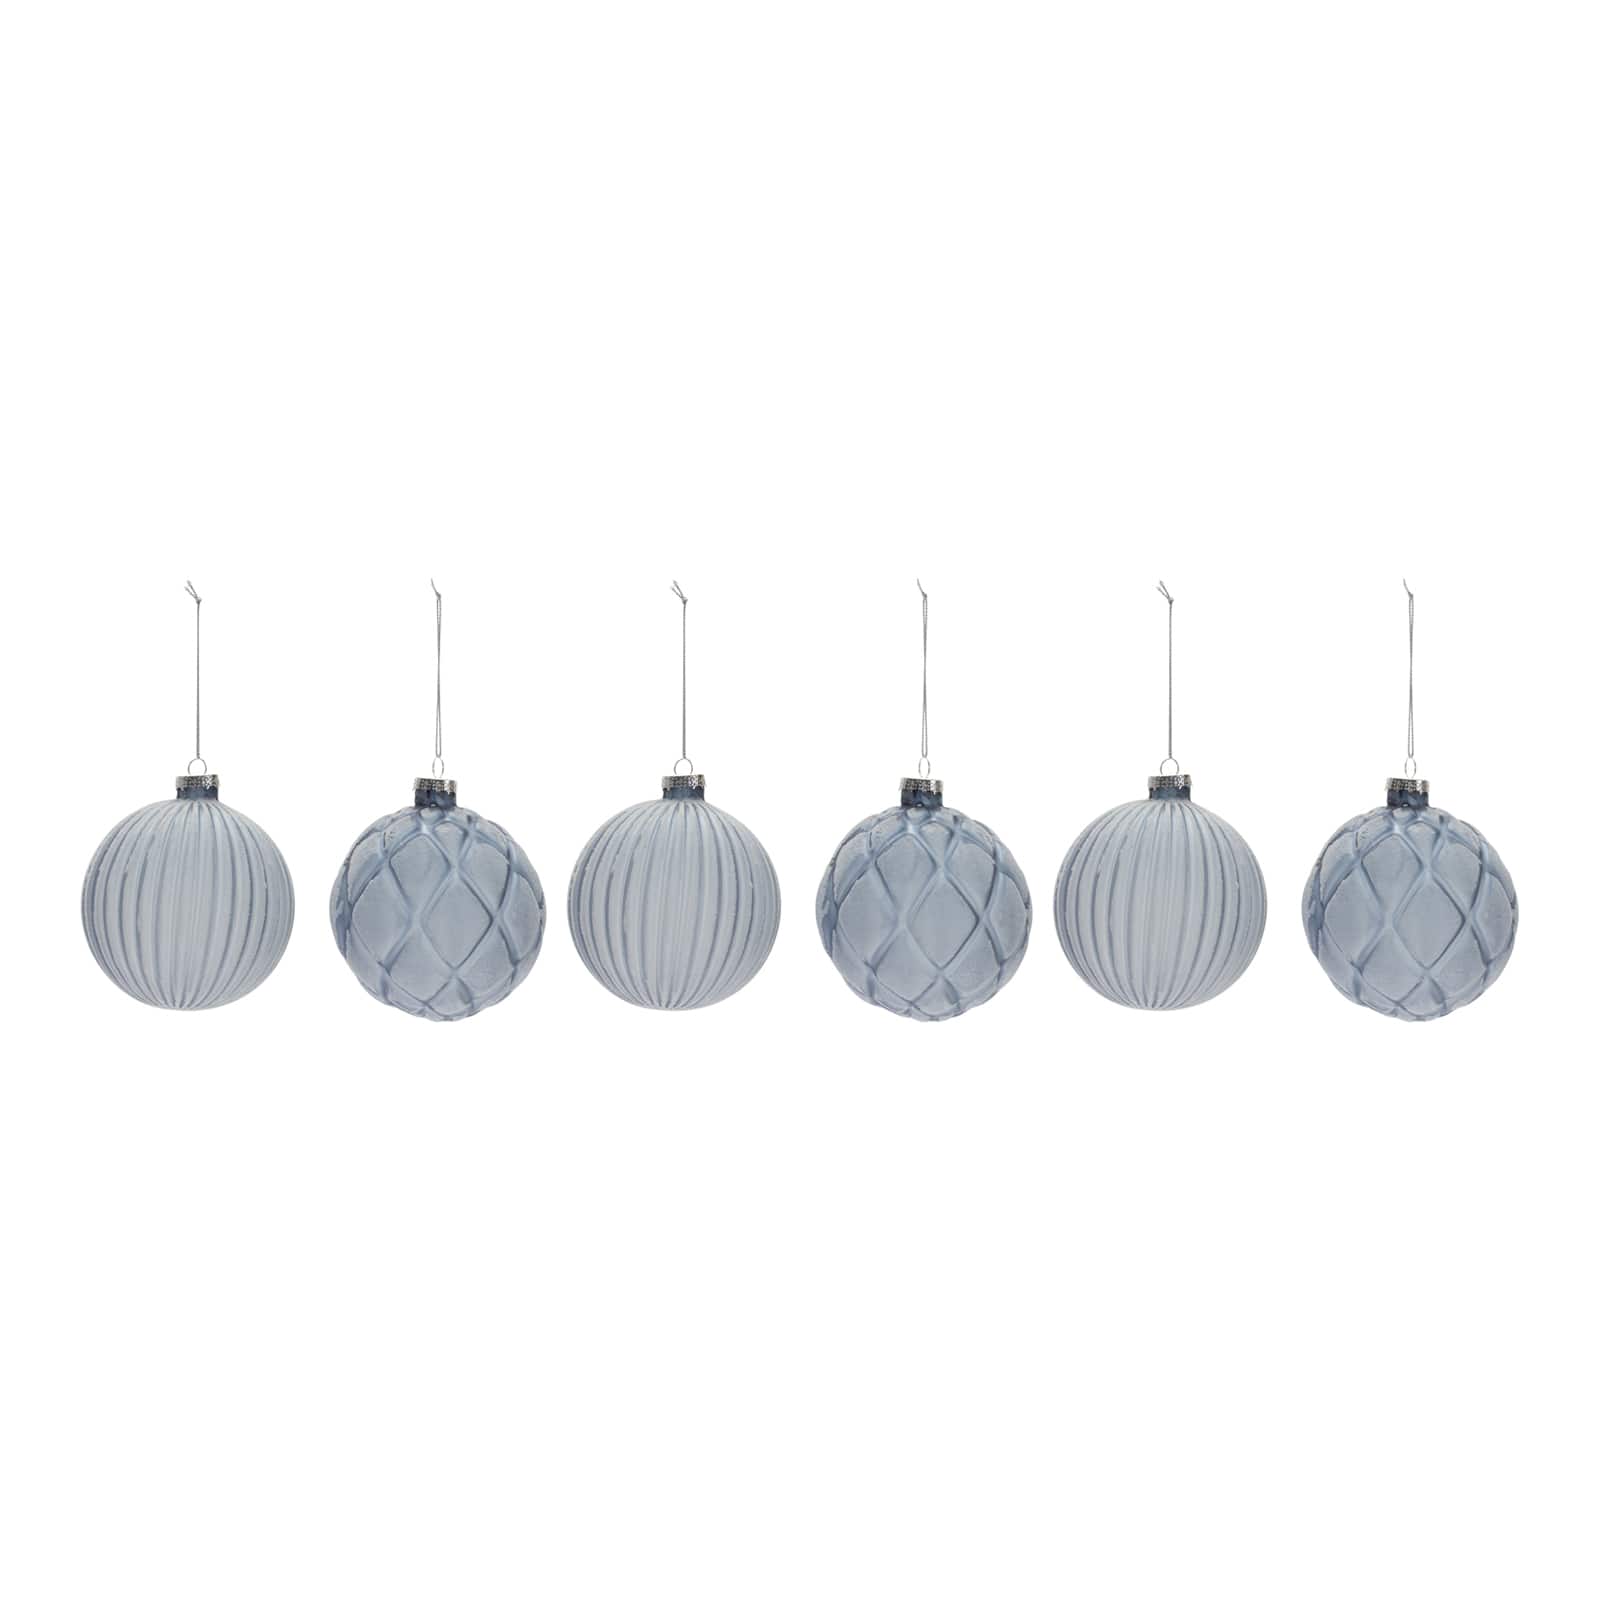 6ct. Frosted Blue Glass Ball Ornaments